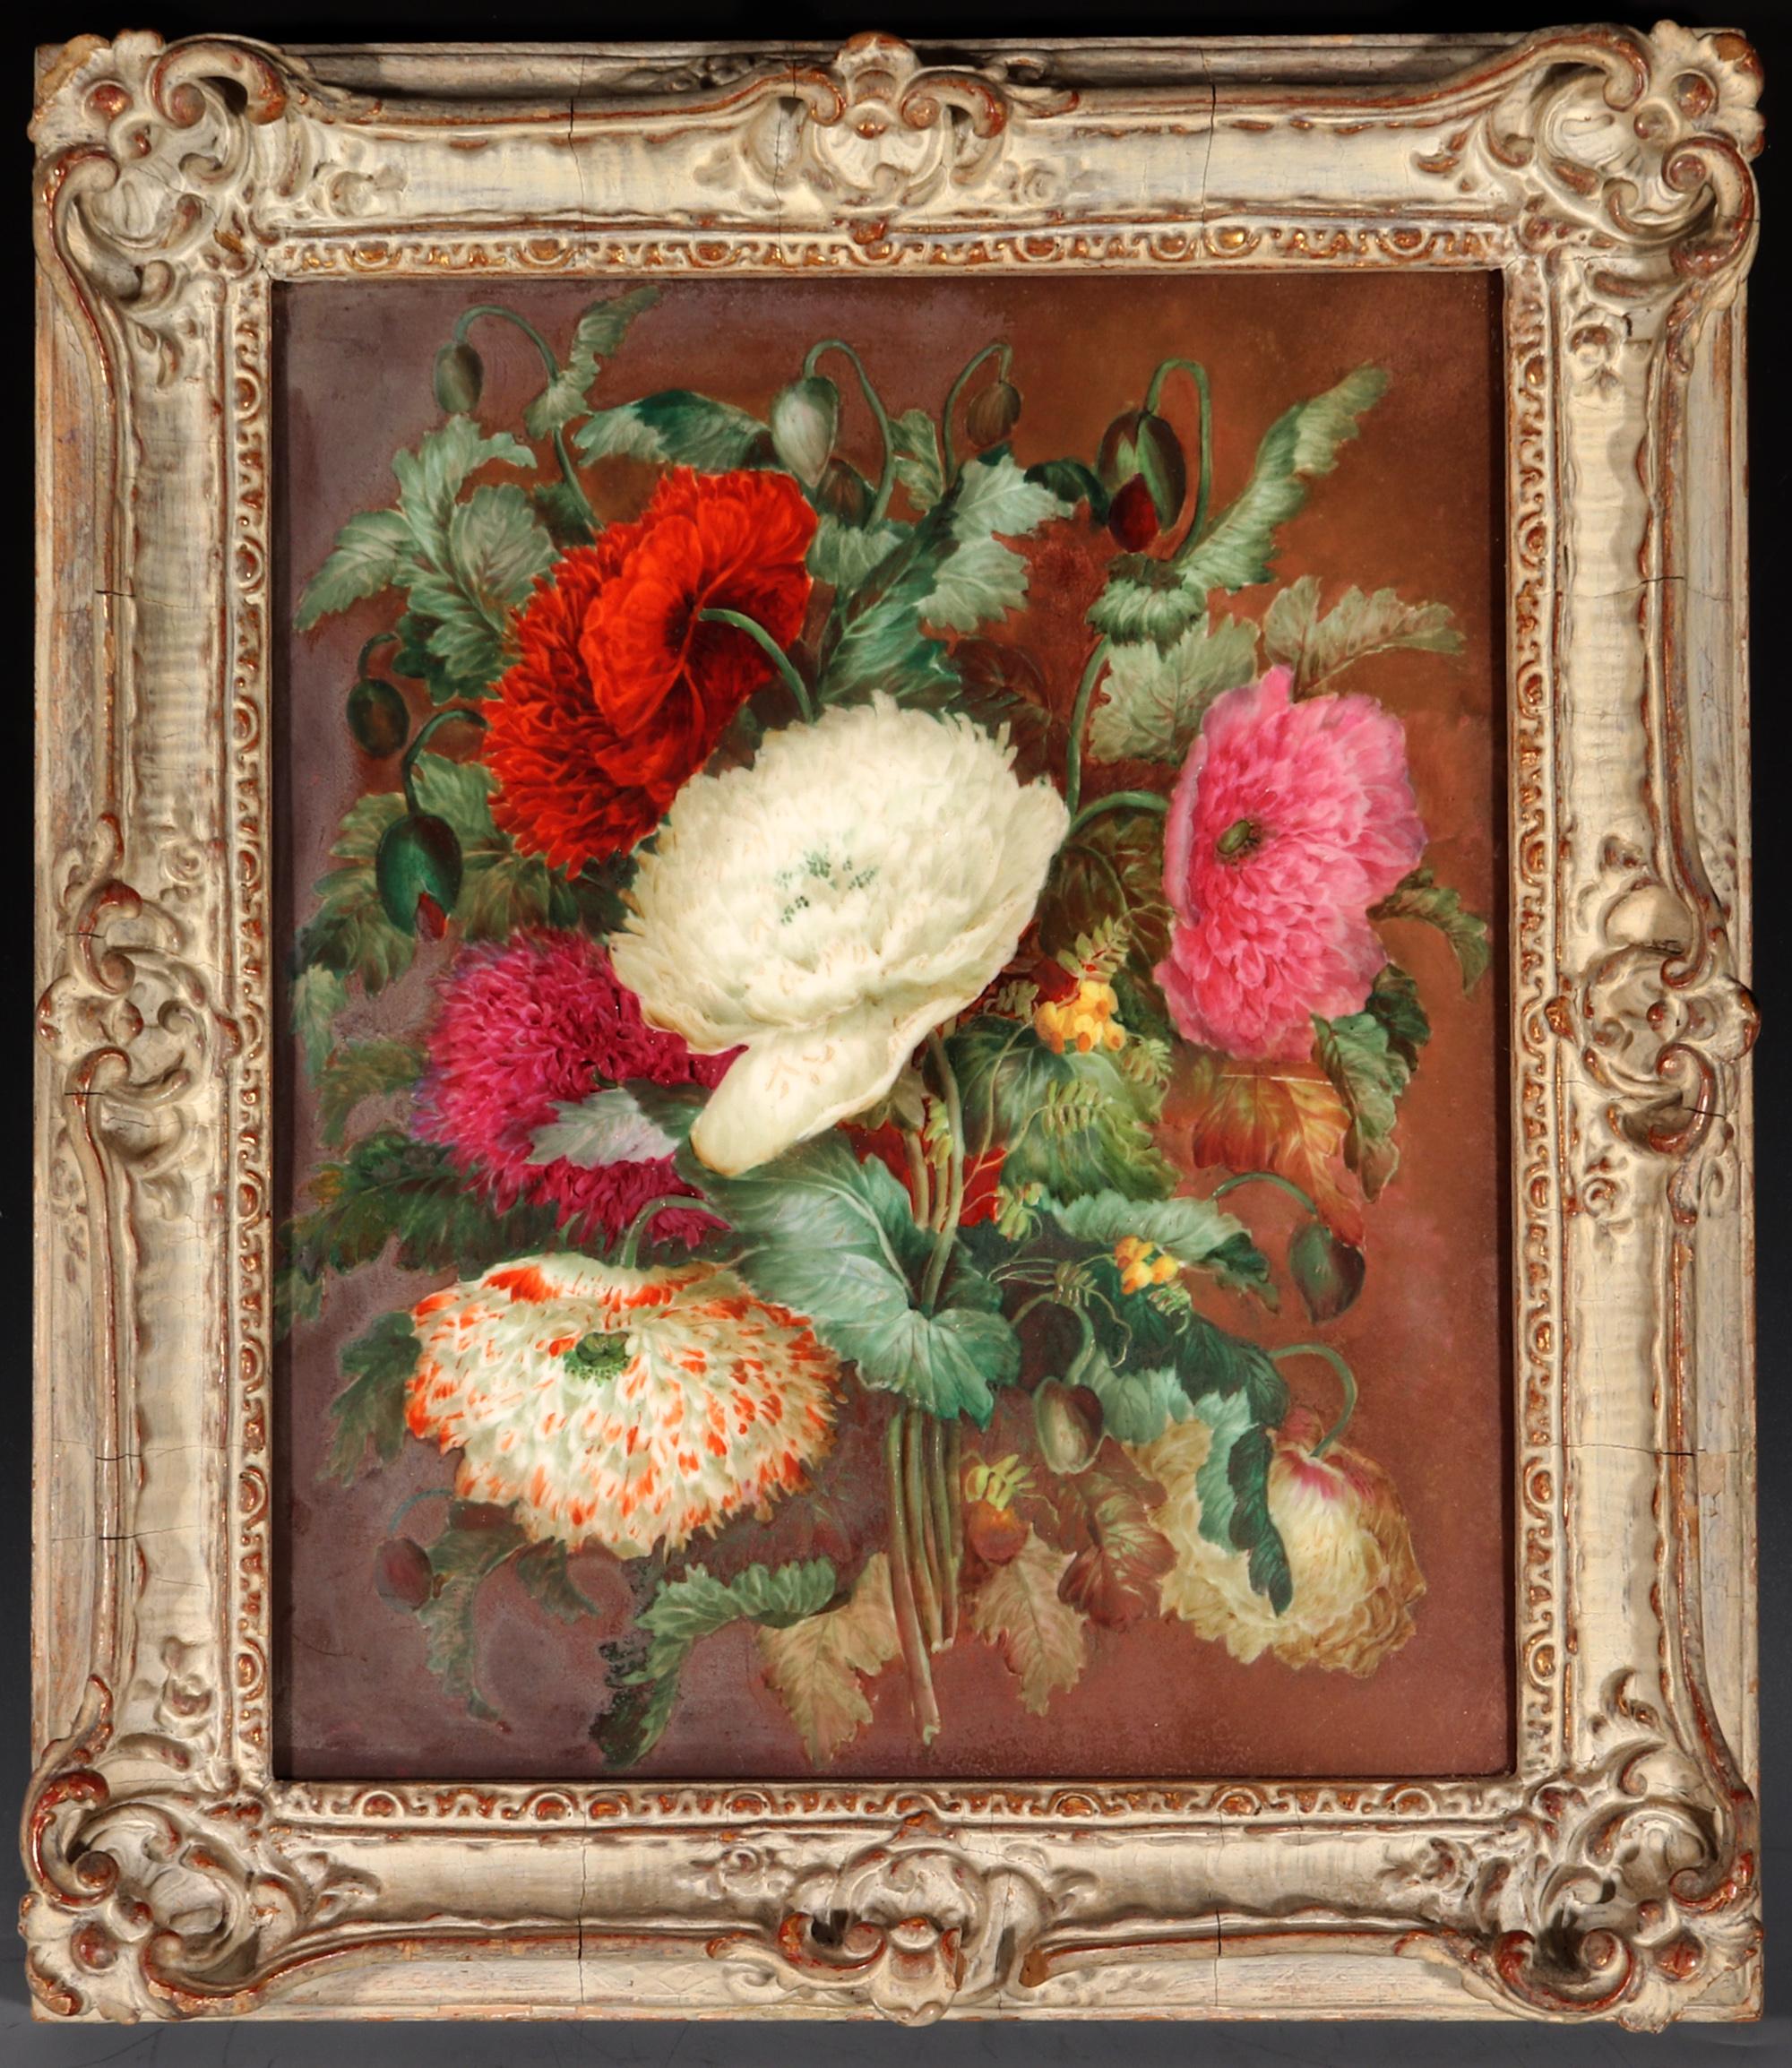 English Porcelain Botanical Plaque, Attributed to Derby For Sale 4